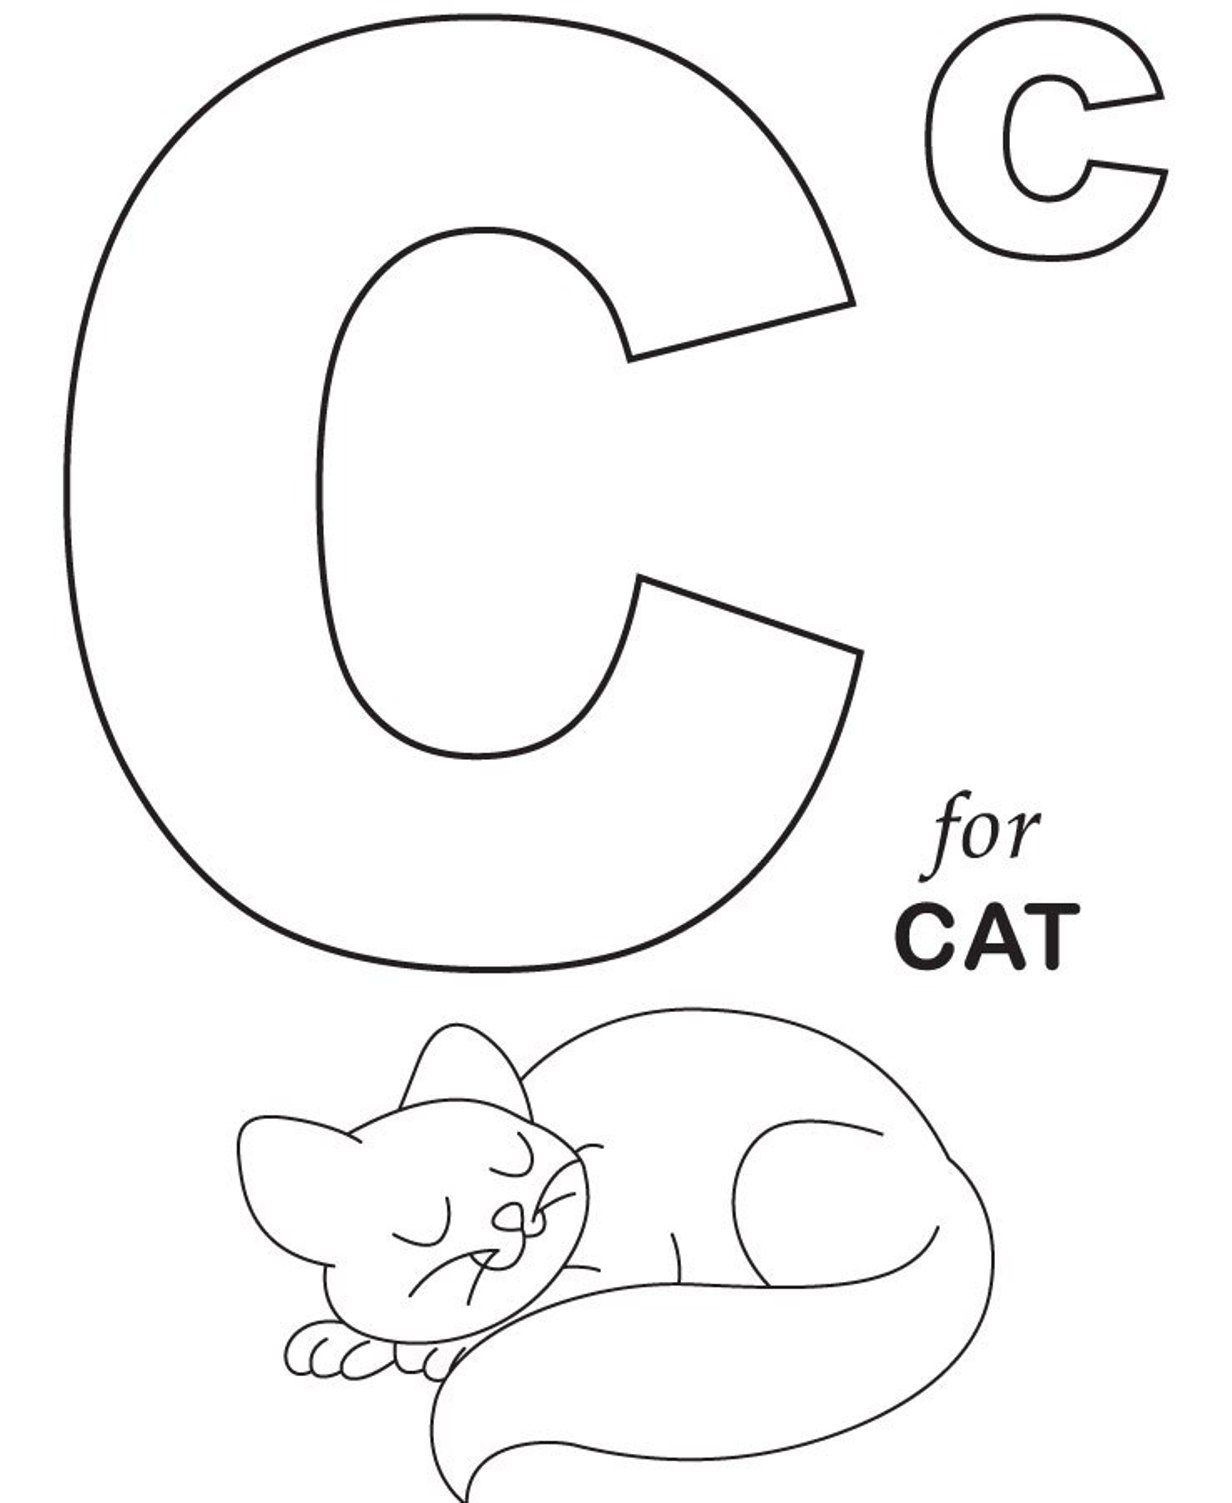 Letter C Colouring Pages : Printable C For Cat Coloring Pages ...